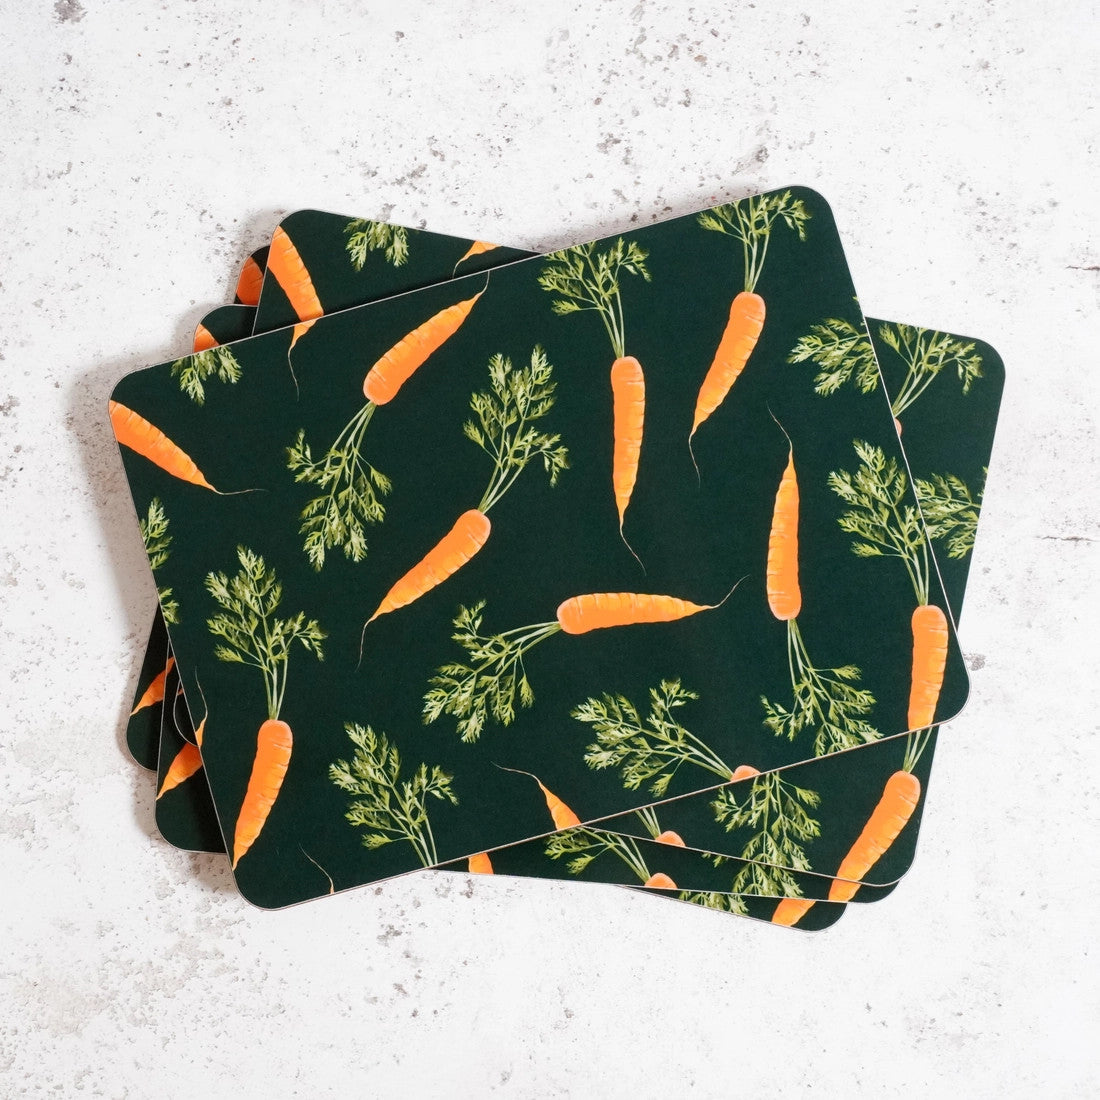 Carrot Placemat by Corinne Alexander. Made in England.